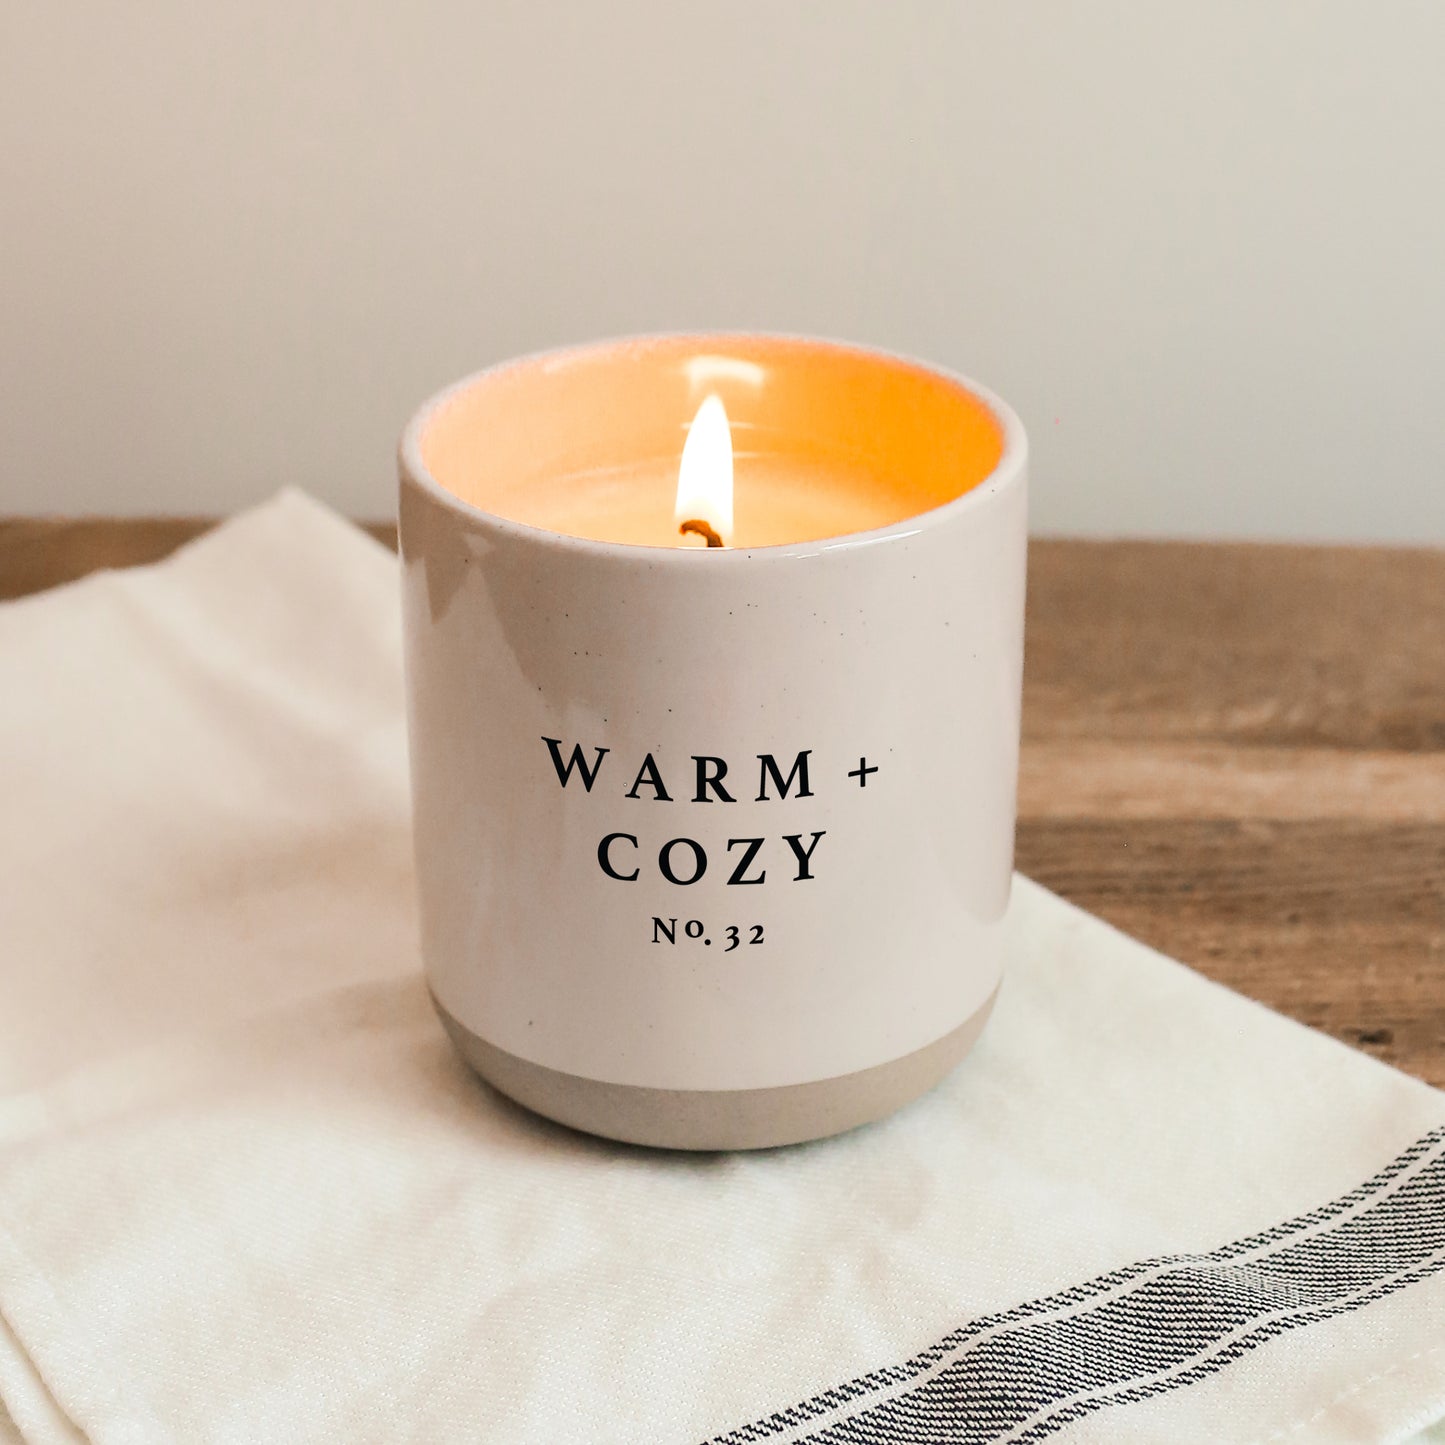 WARM + COZY SOY CANDLE